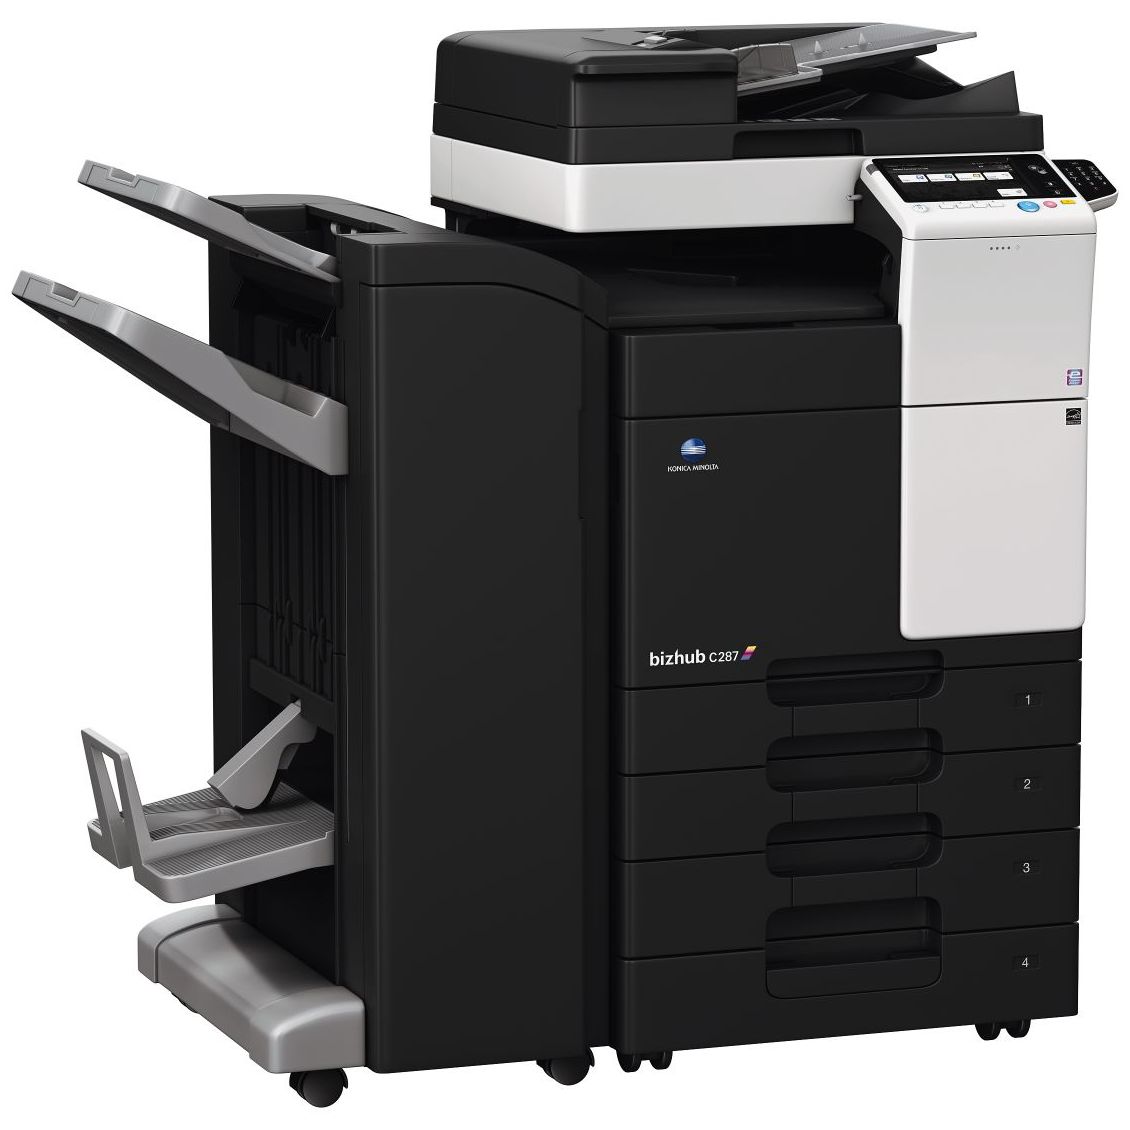 Get Free Konica Minolta Bizhub C287 Pay For Copies Only